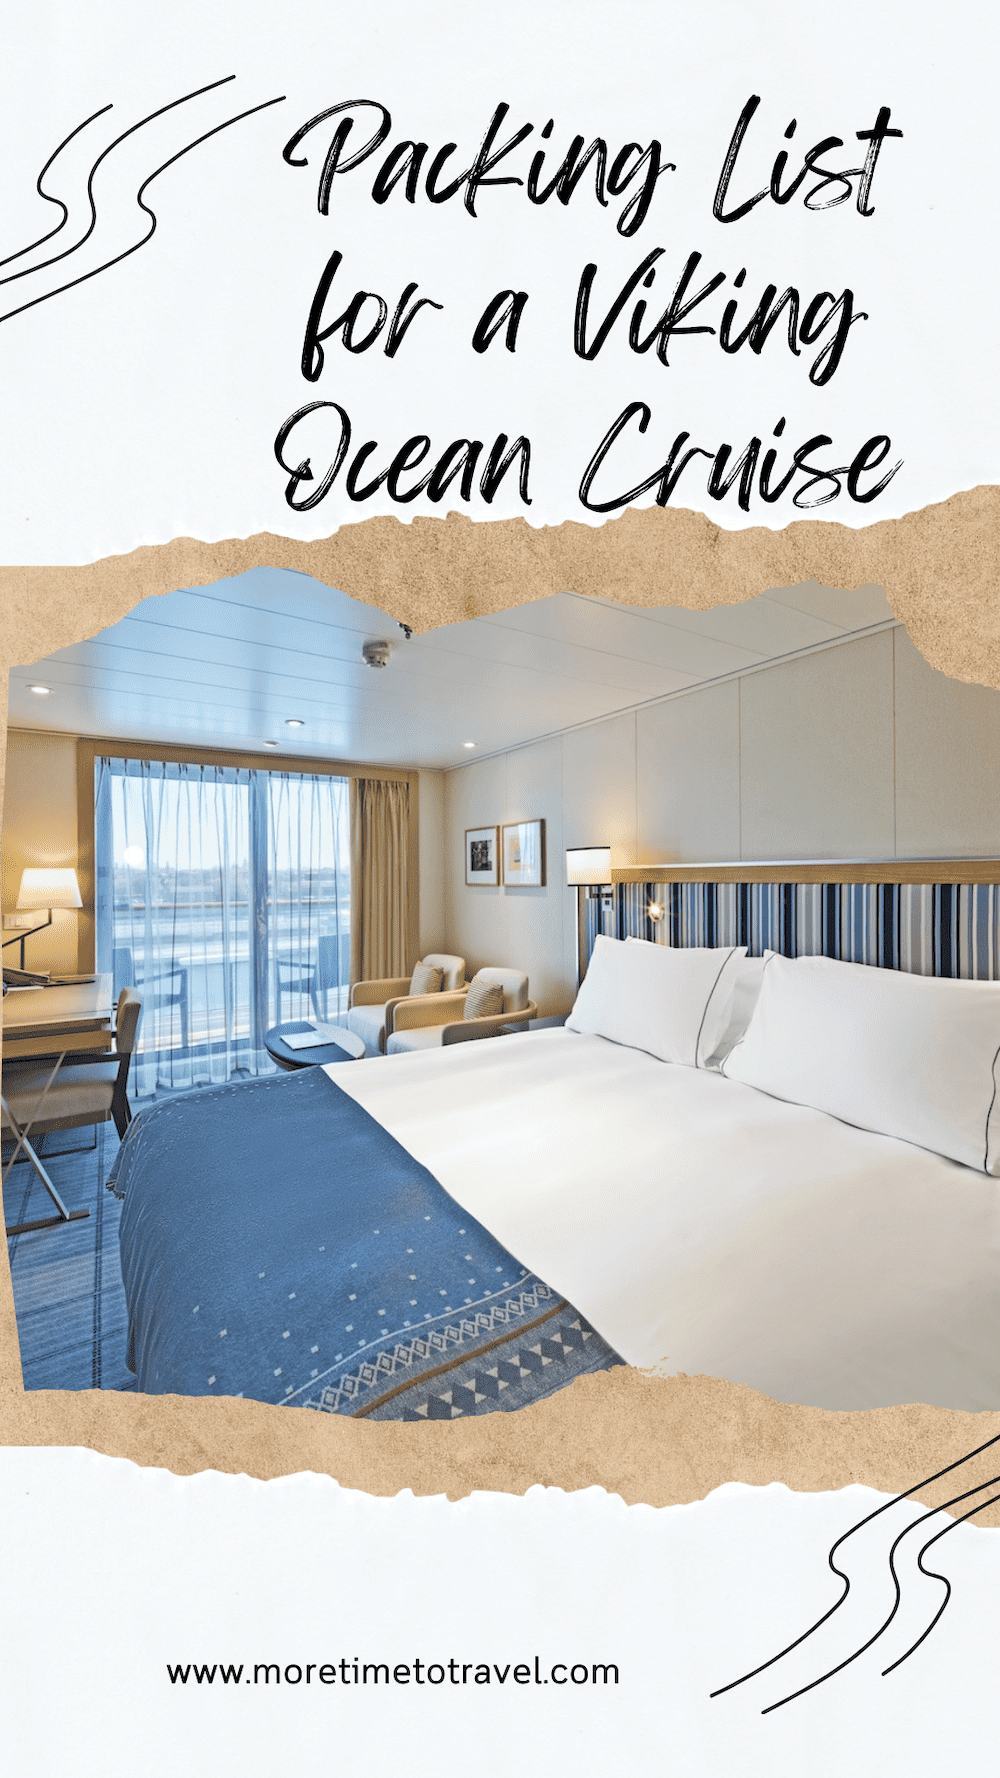 Packing List for a Viking Ocean Cruise - pin